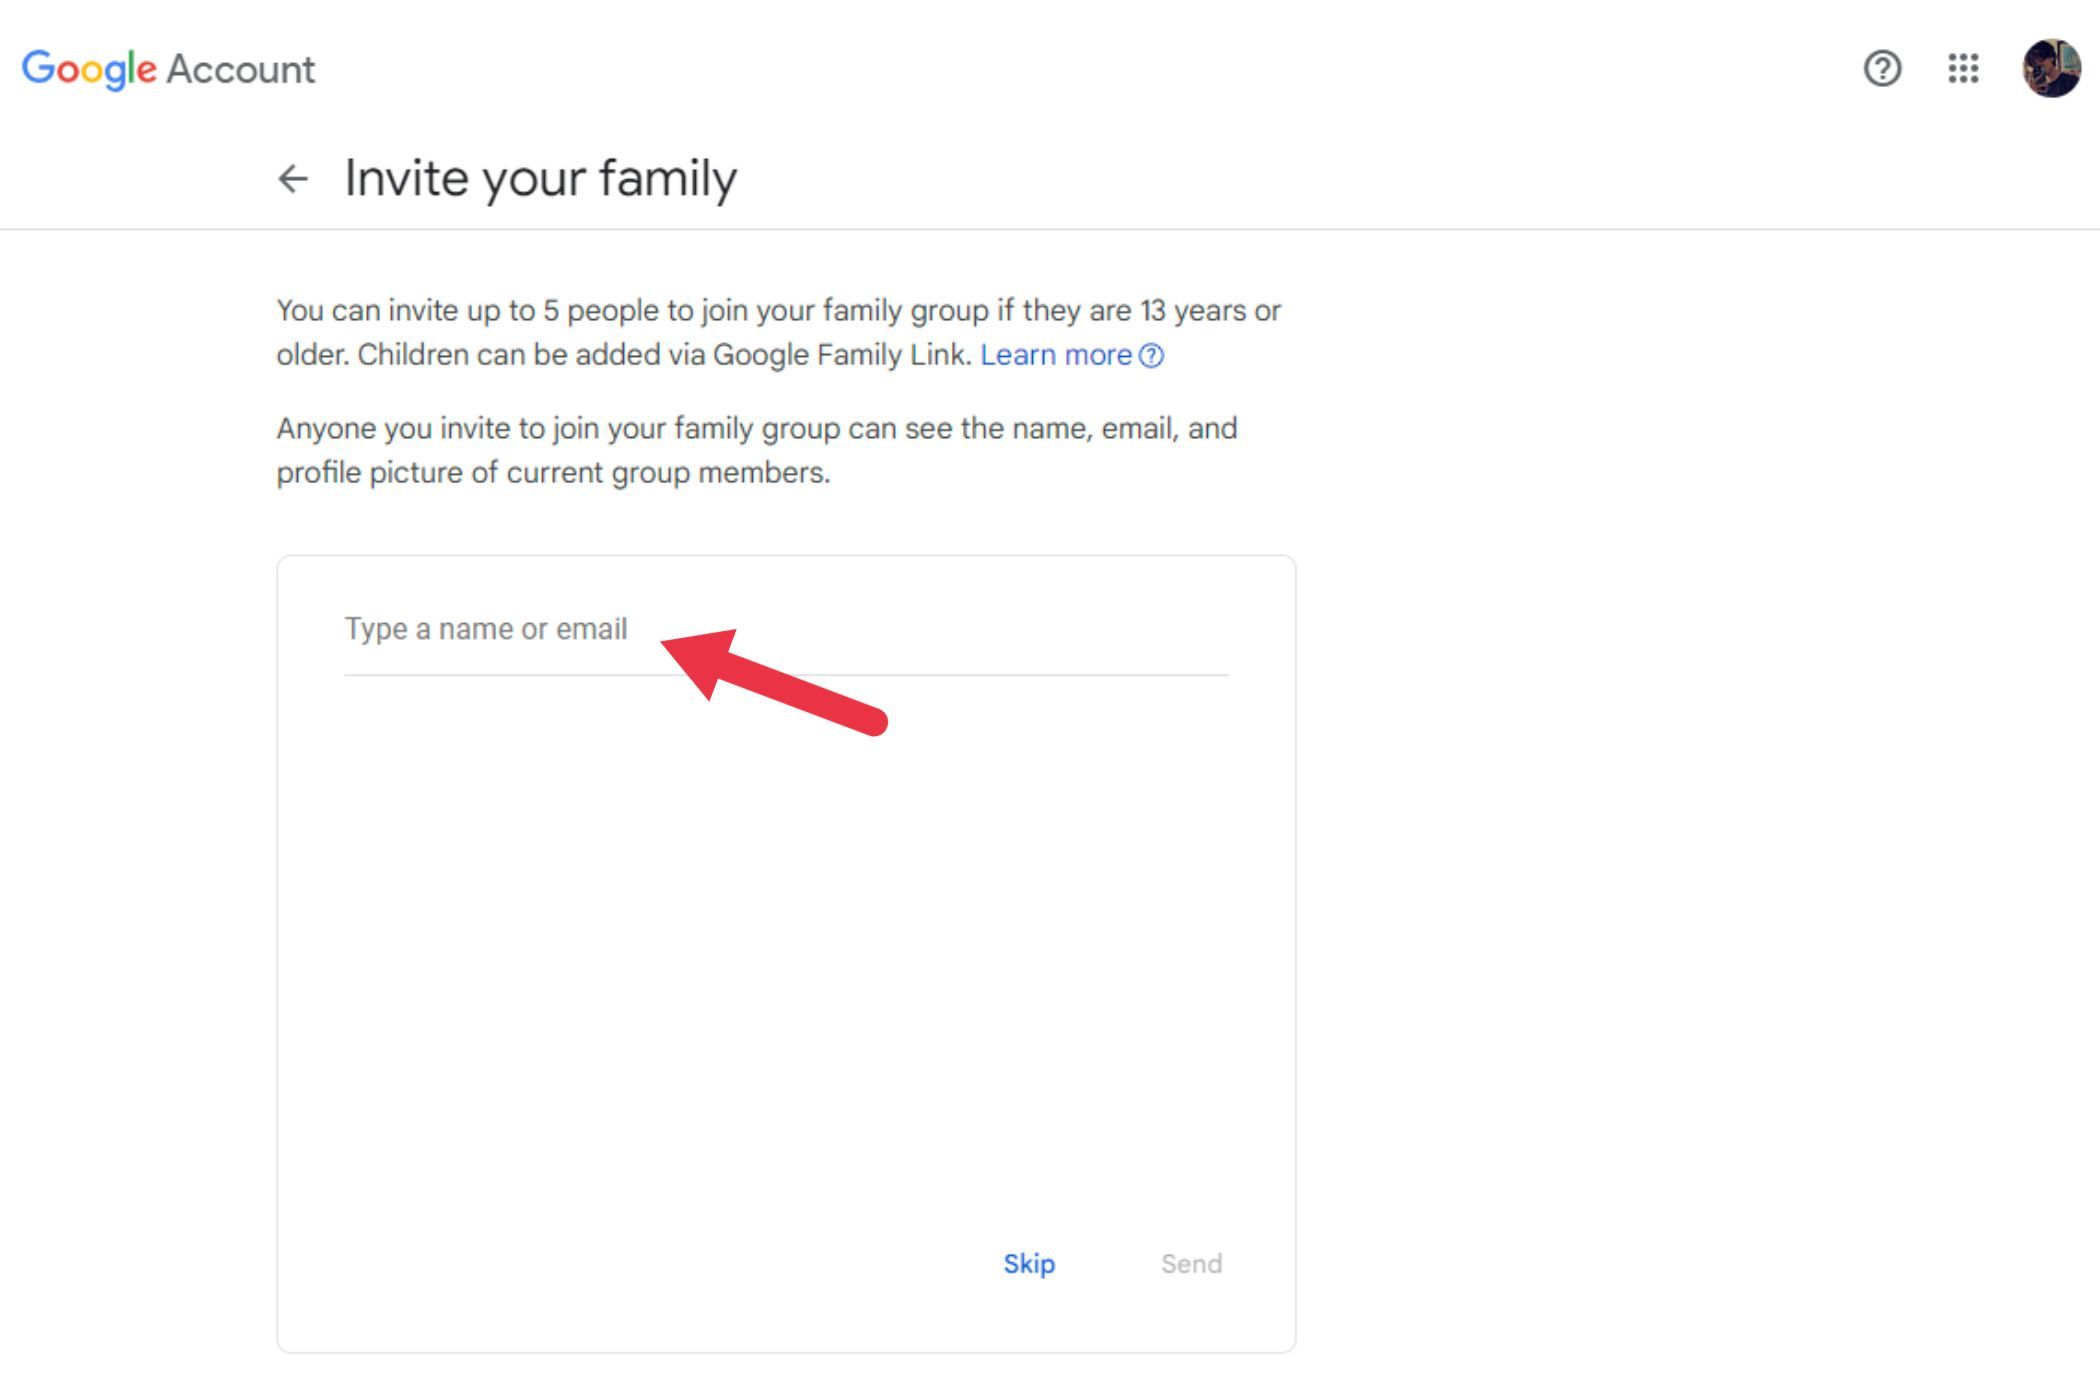 Add up to five family members by entering their names or email addresses. Children under 13 can be added through Google Family Link, or skip this step for now.